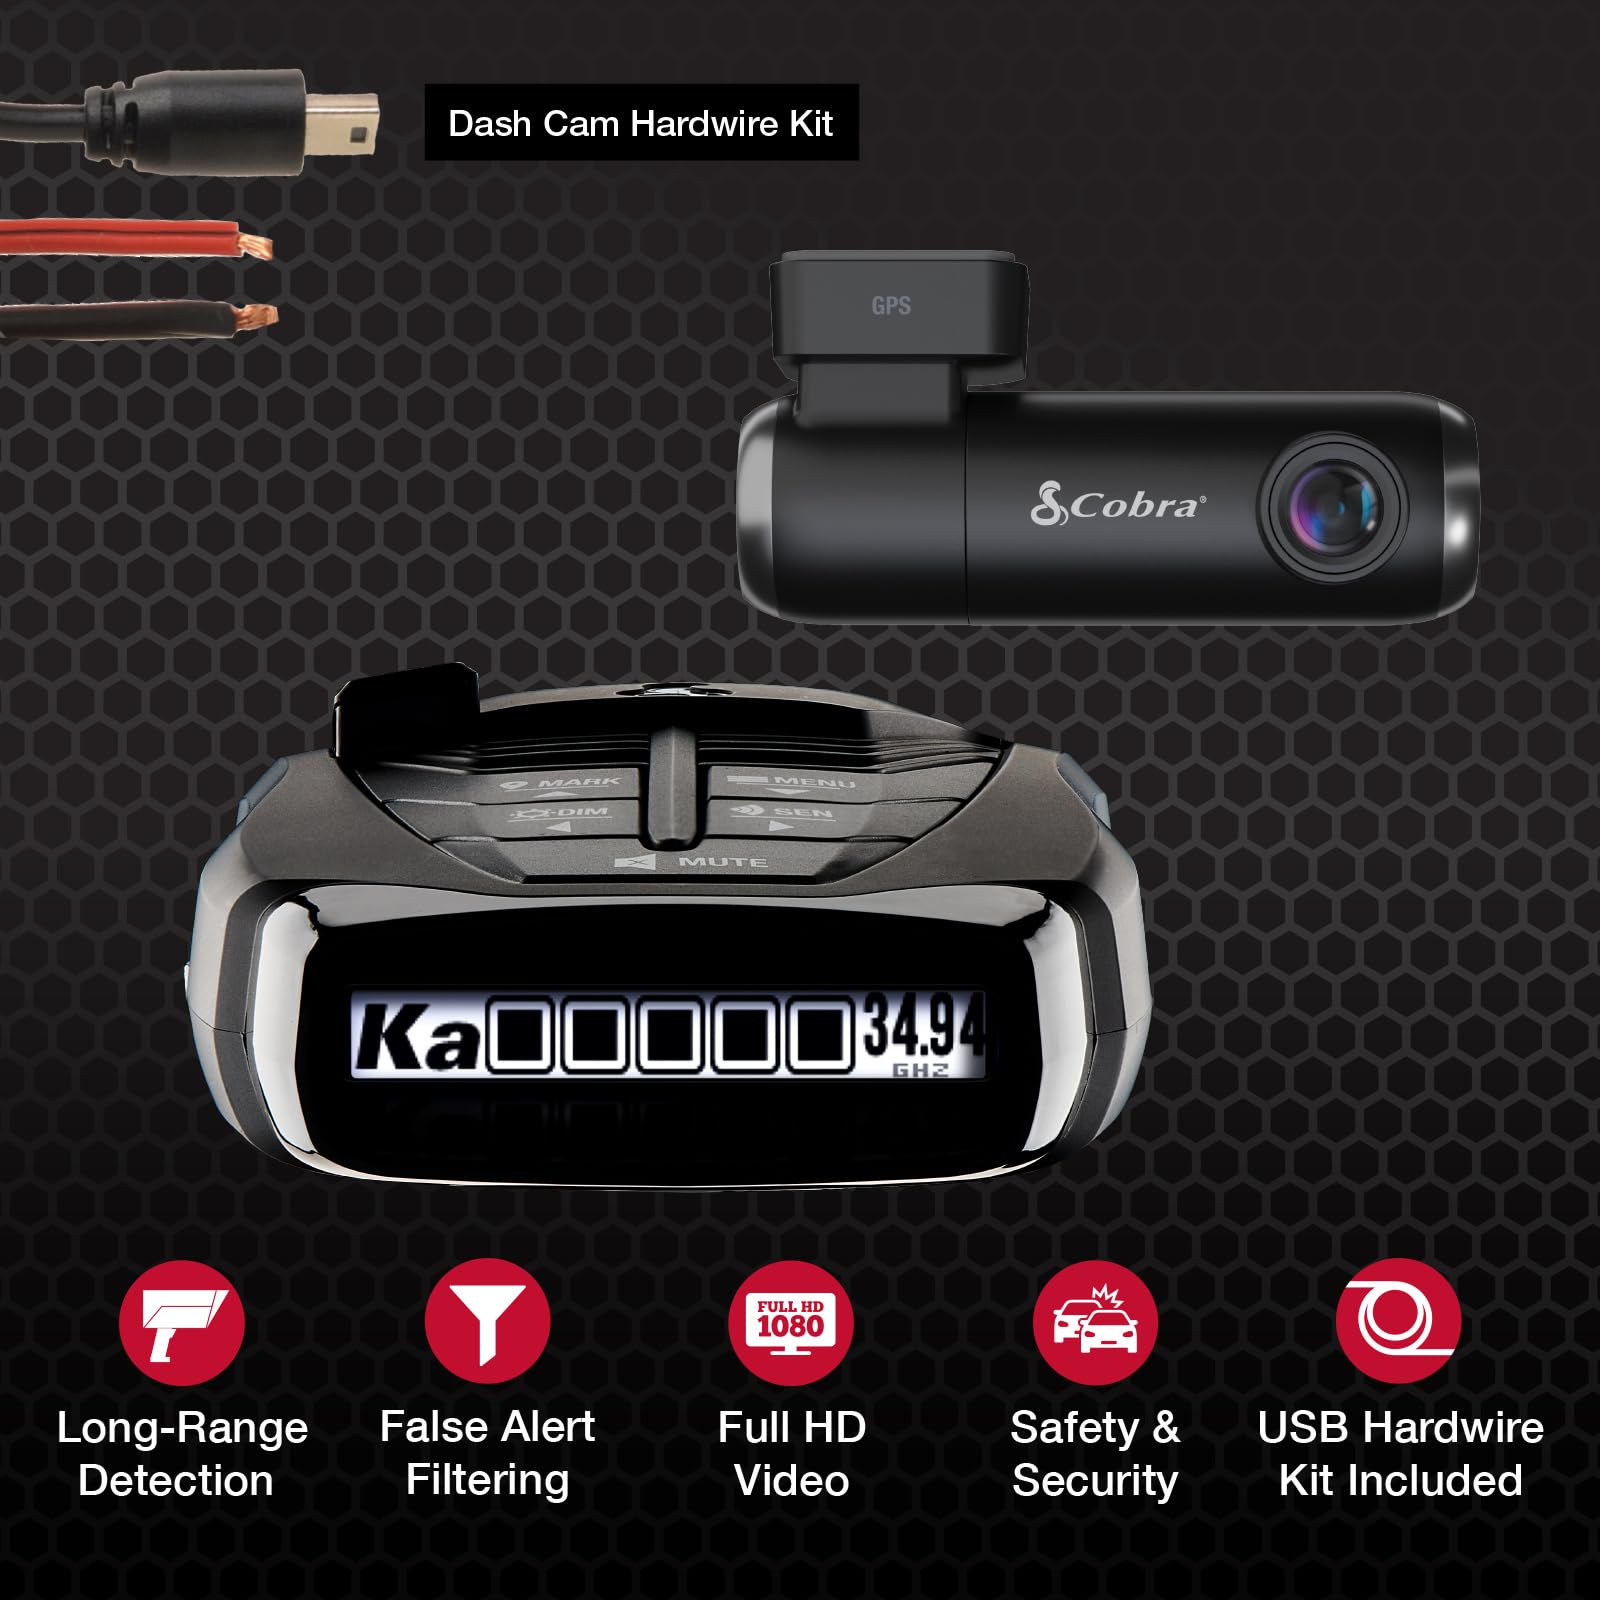 Cobra RAD 480i Laser Radar Detector & SC100 Smart Dash Cam + 2.5A Micro USB Hardwire Kit for Dash Cams: Long Range Front and Rear Detection, DSP, Full HD 1080P Resolution, Built-in WiFi & GPS